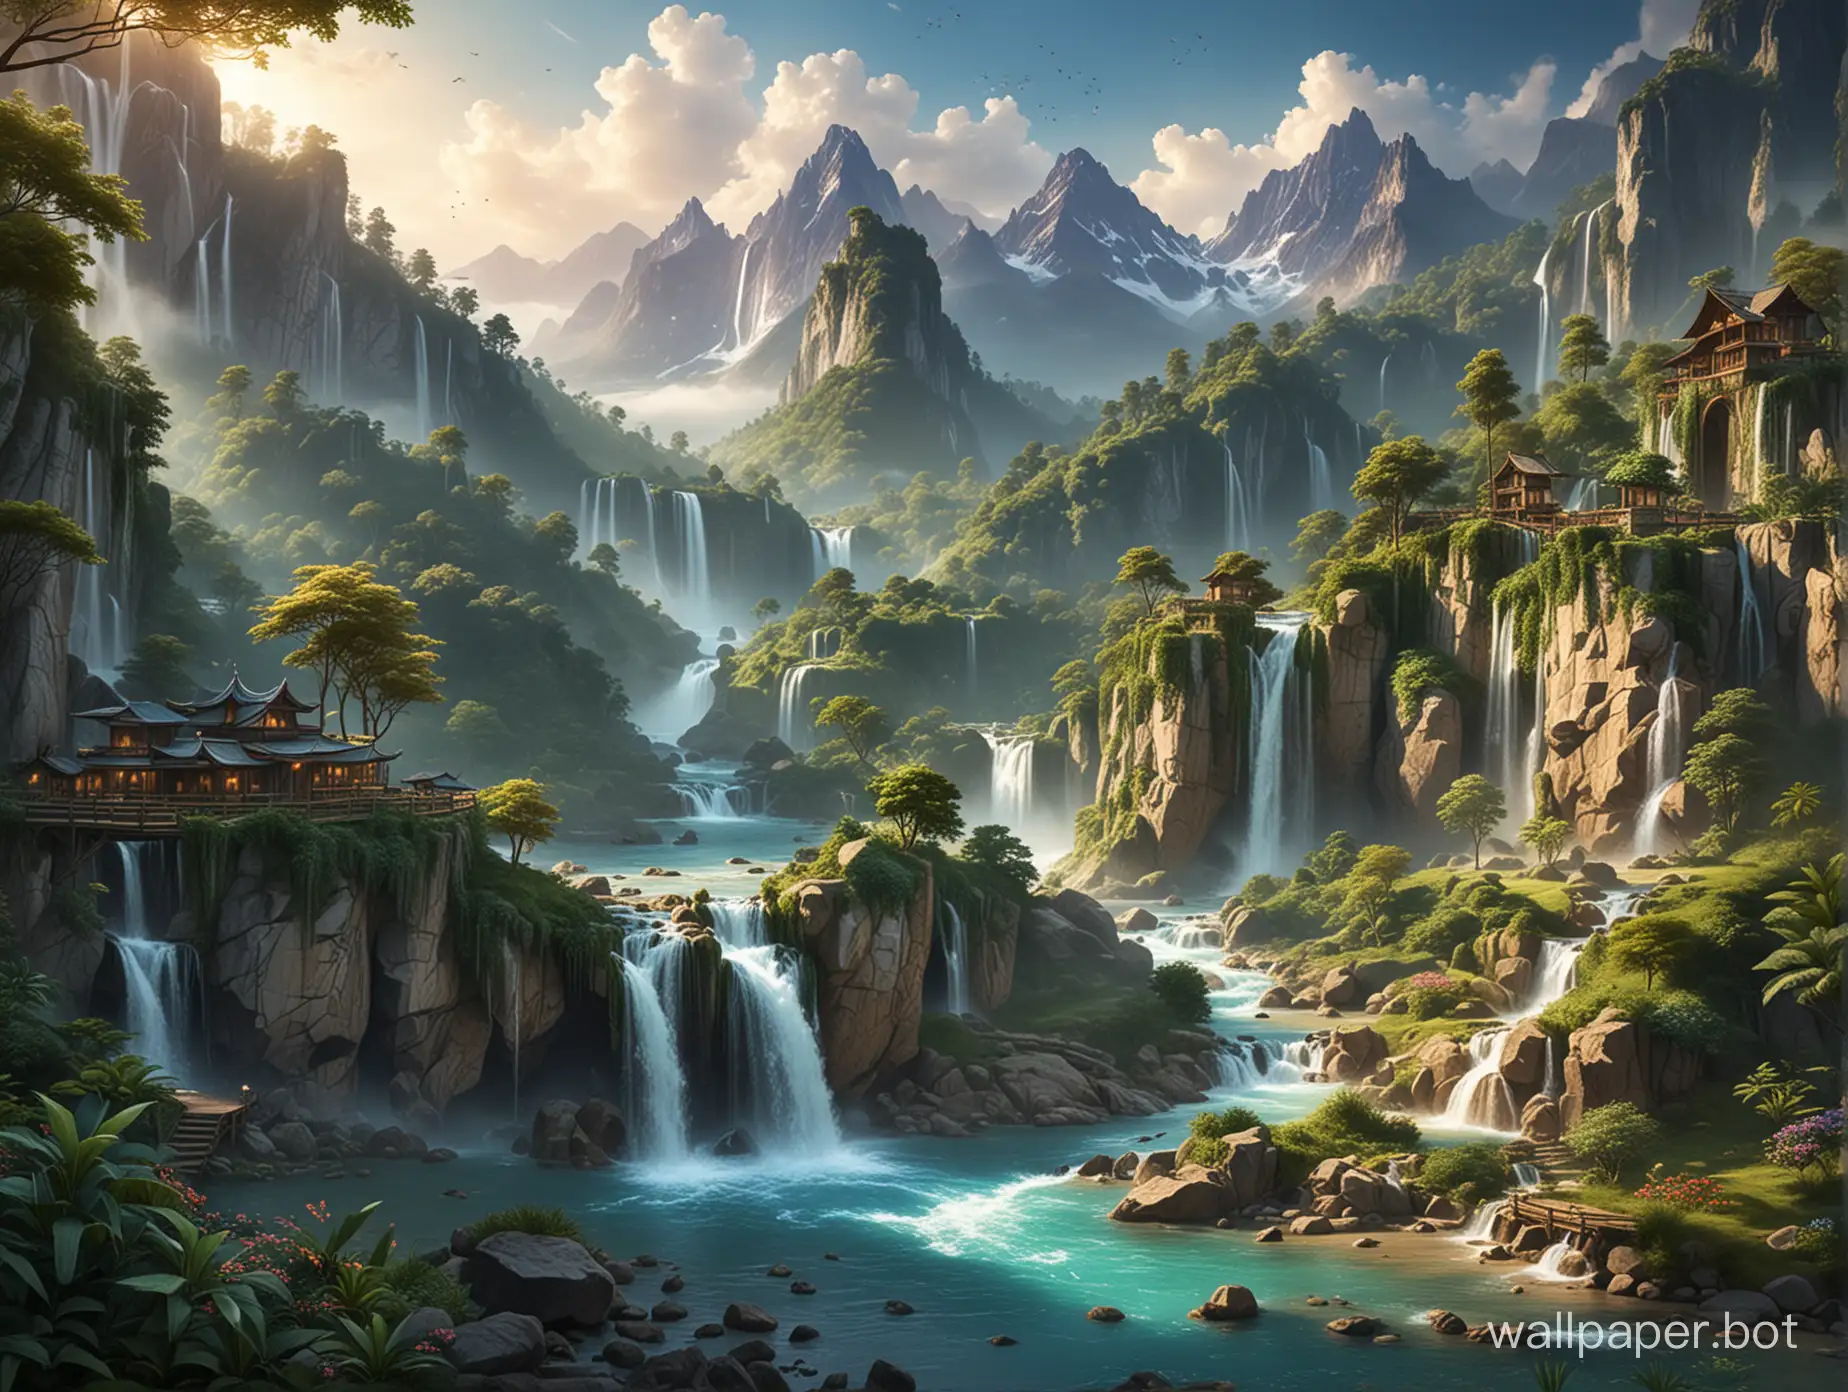 land of dreams filled with waterfall and mountains